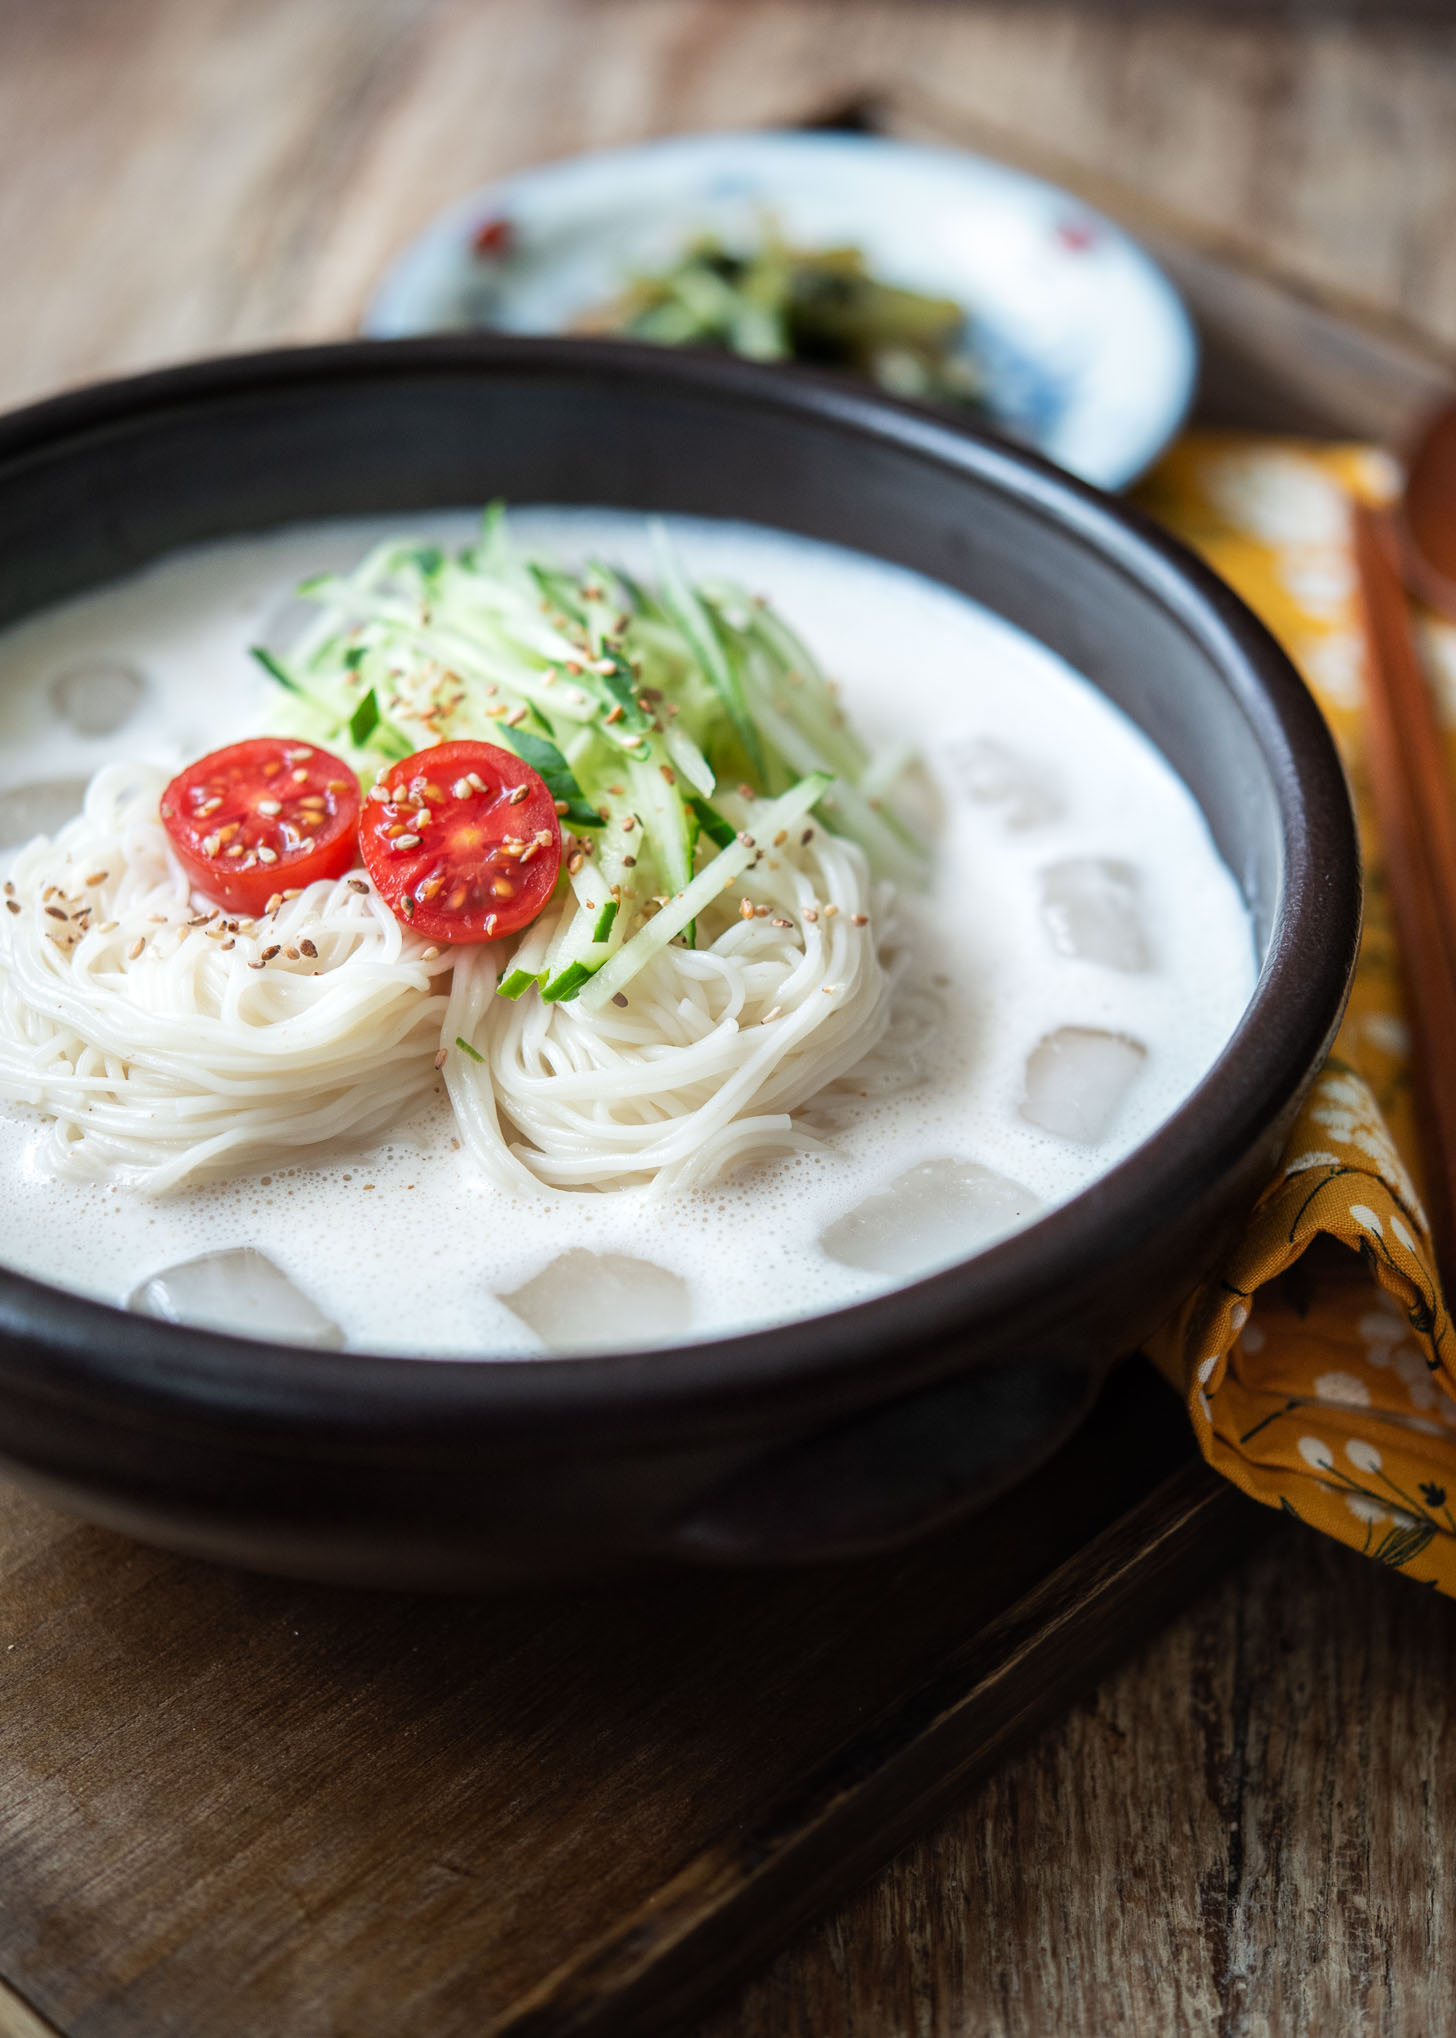 Cucumber, tomato, and ice are added to garnish kongguksu, soy milk noodle soup.